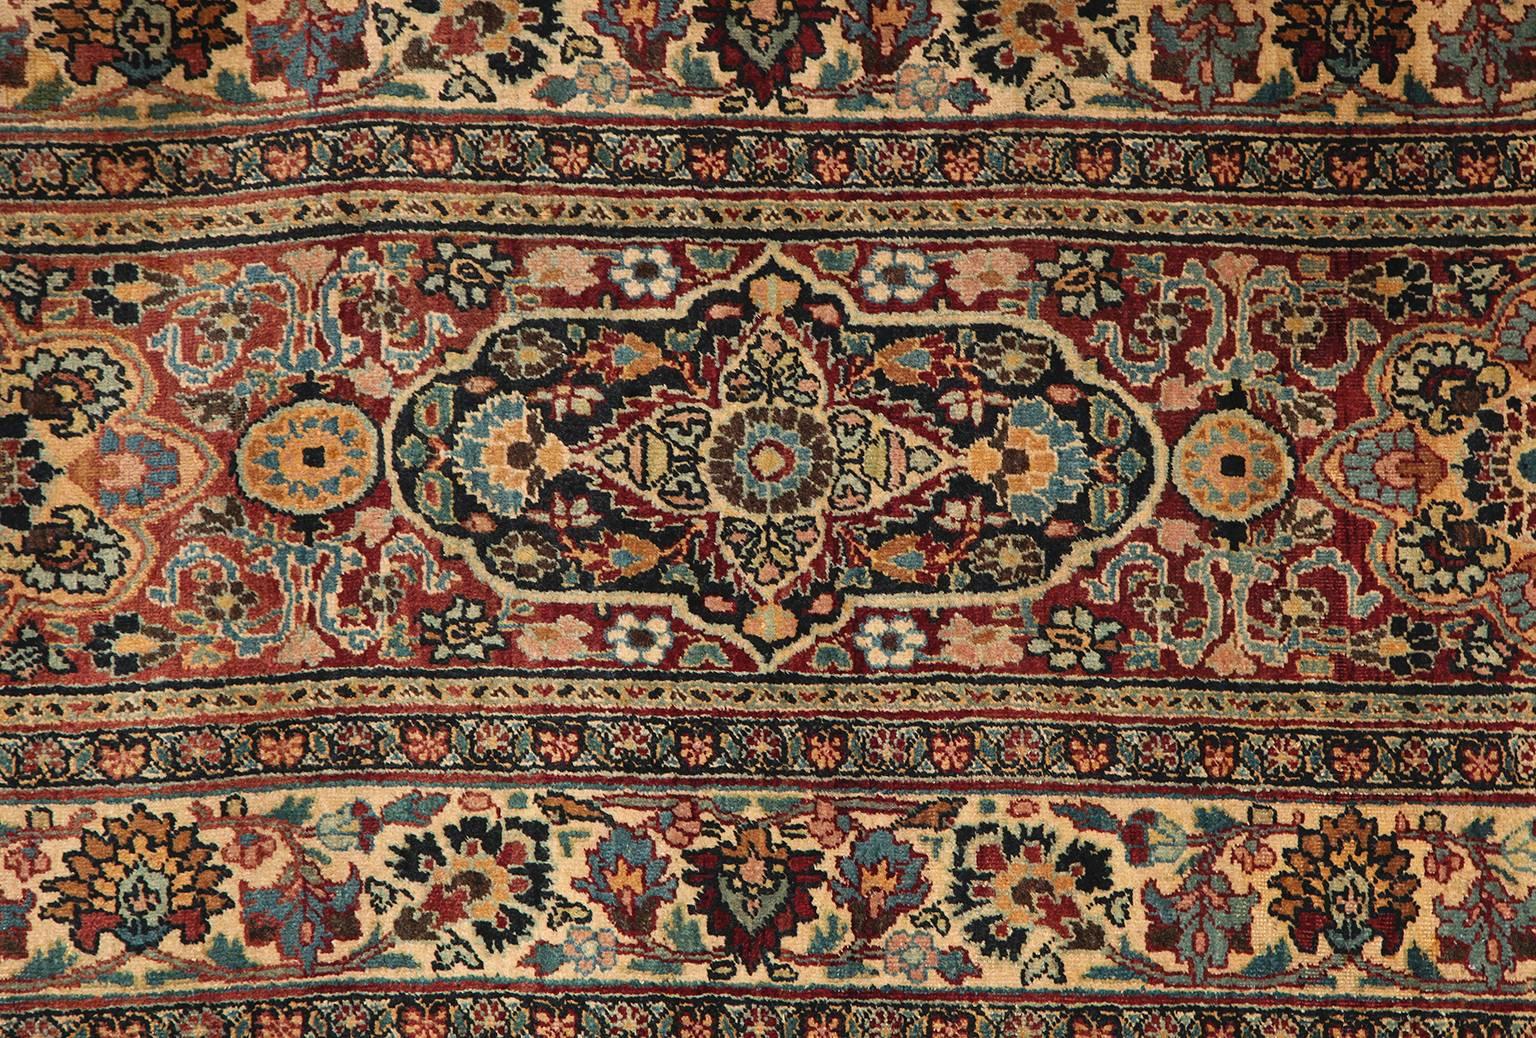 Late 19th Century Antique 1870s Persian Tabriz Rug Woven by Order of Prince Shahrukh Mirza, 13x21 For Sale